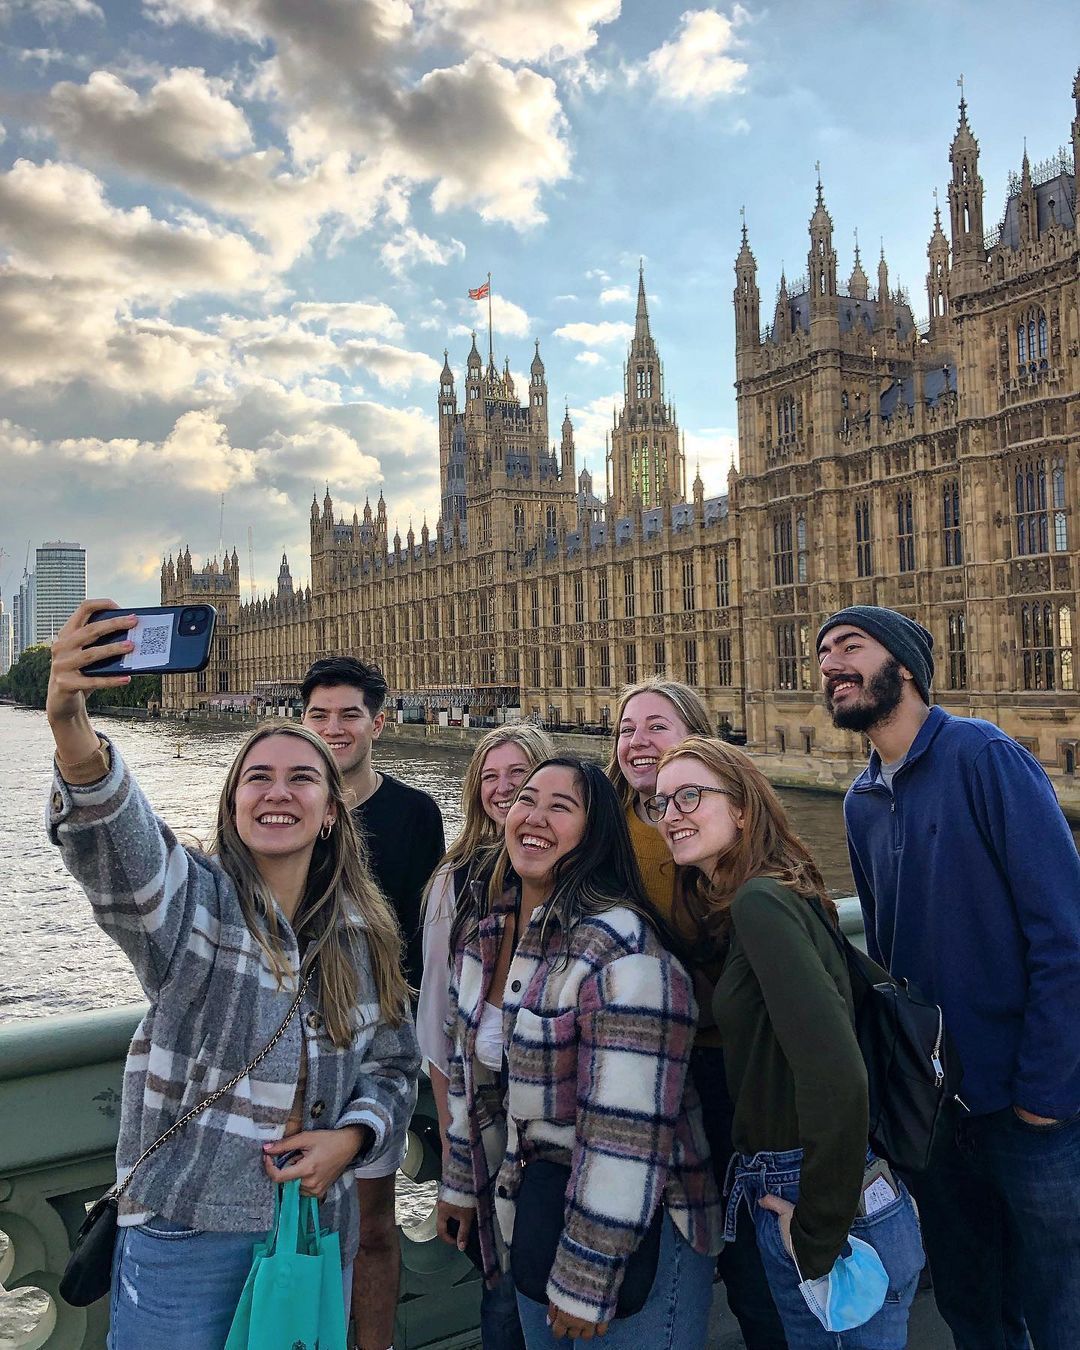 A group of people taking a selfie in front of the Palace of Westminster.